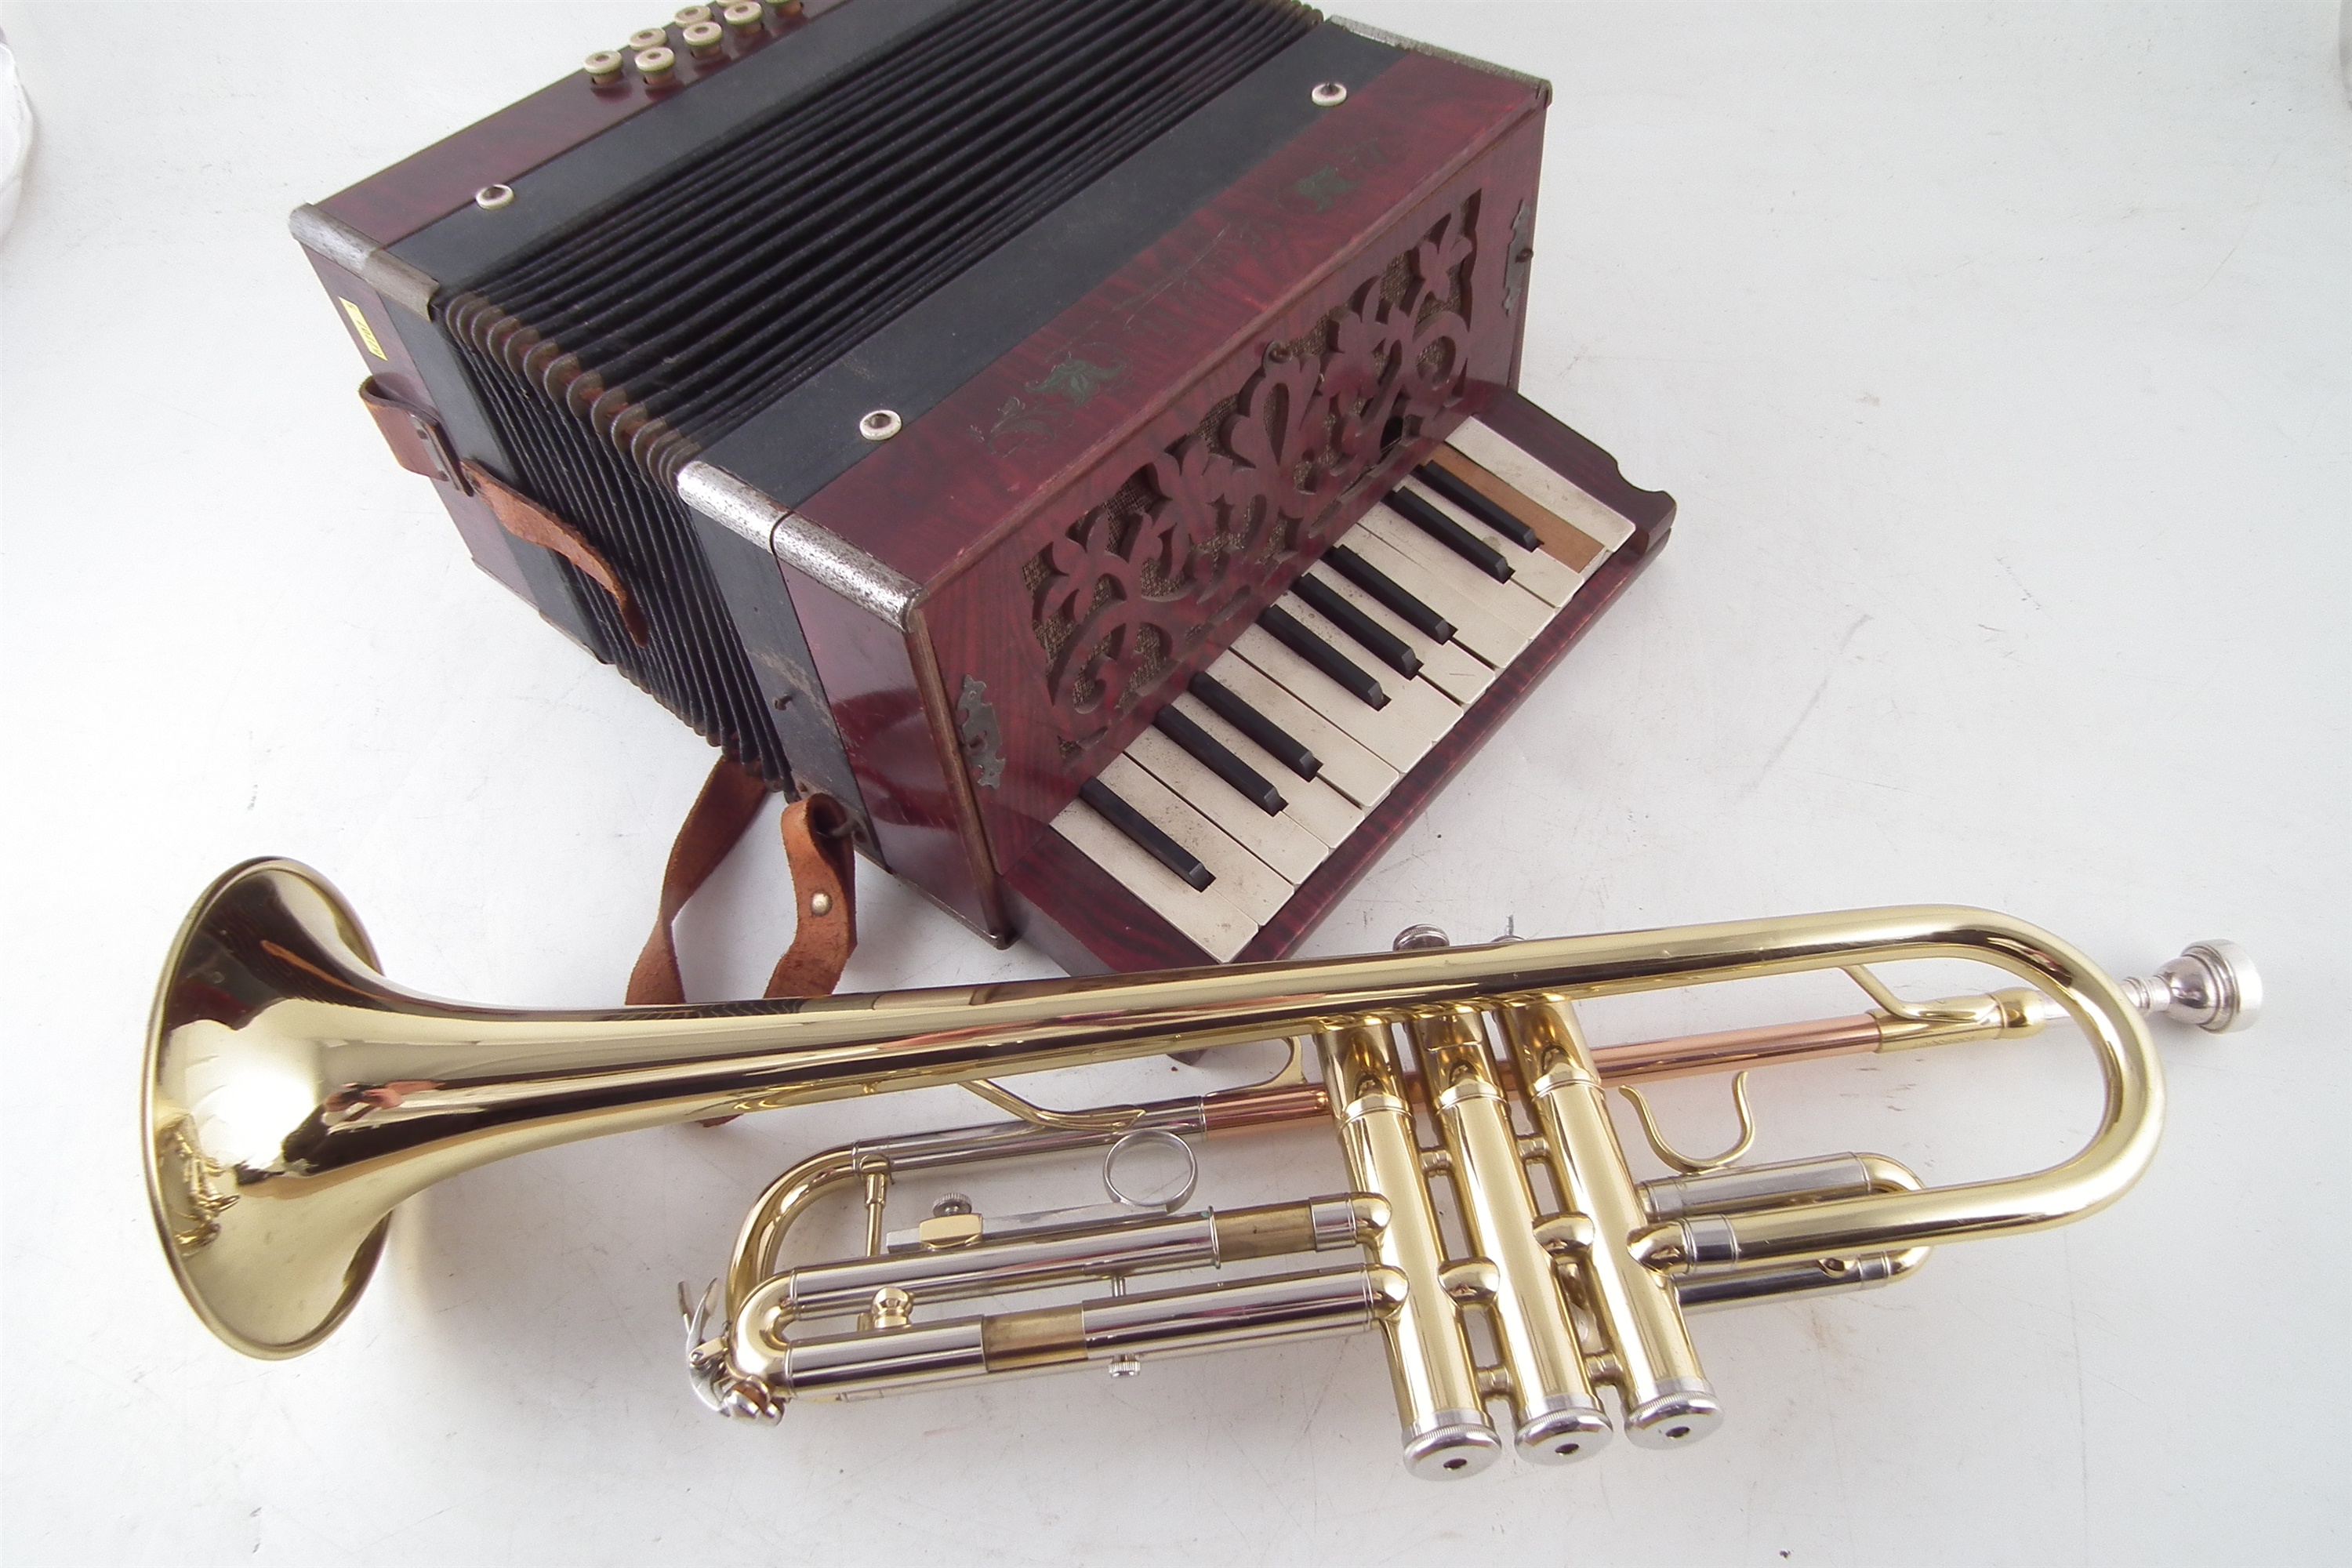 Odyssey trumpet in case and Rosetti piano accordion. - Image 5 of 6